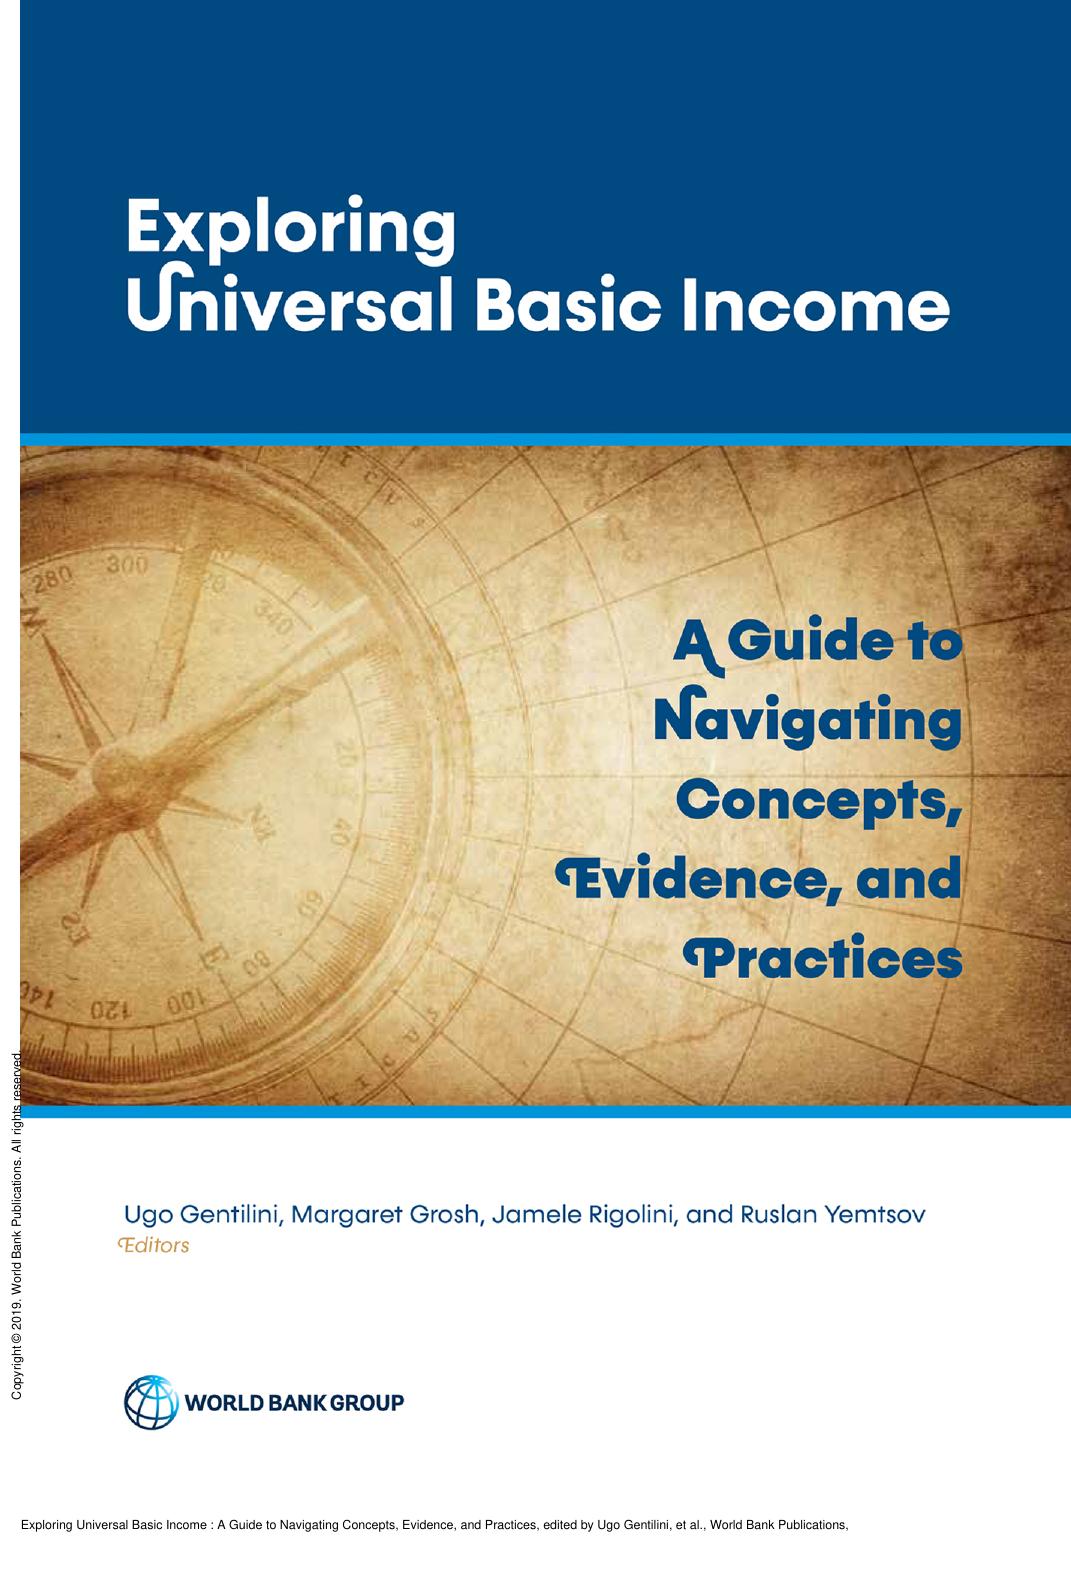 Exploring Universal Basic Income : A Guide to Navigating Concepts, Evidence, and Practices by Ugo Gentilini; Margaret Grosh; Jamele Rigolini; Ruslan Yemtsov